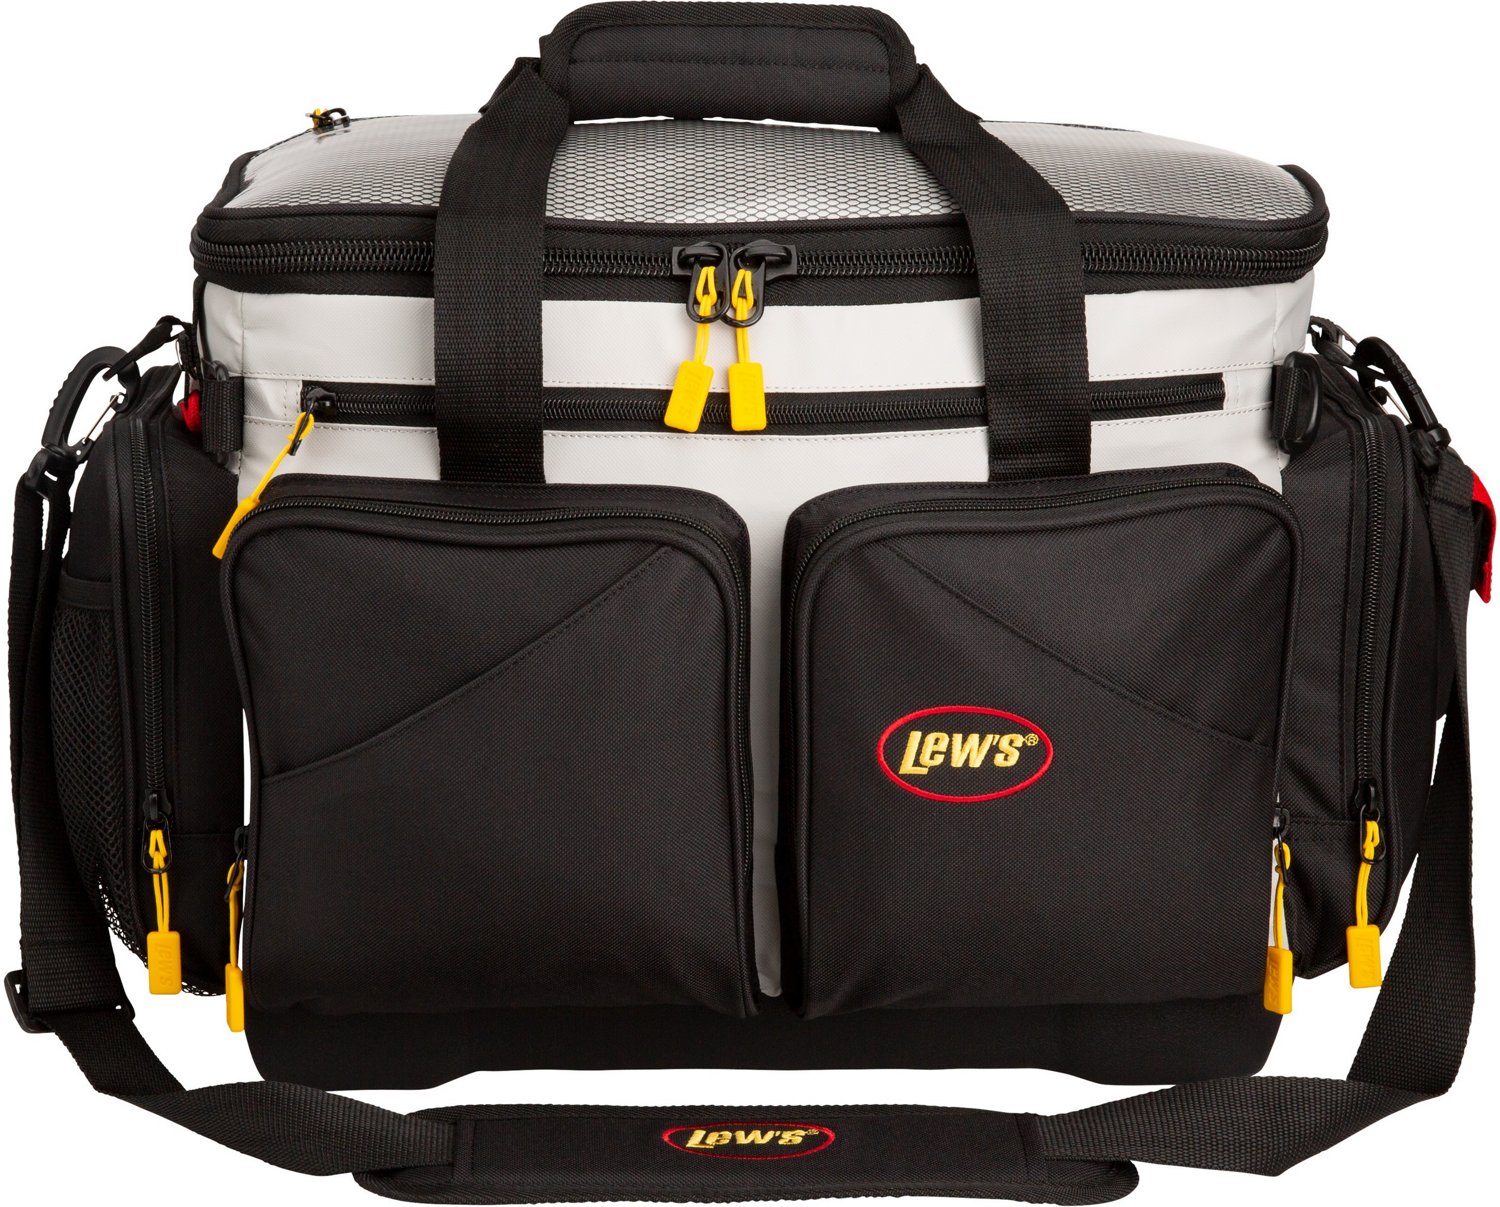 Lew's Utility Tackle Bag